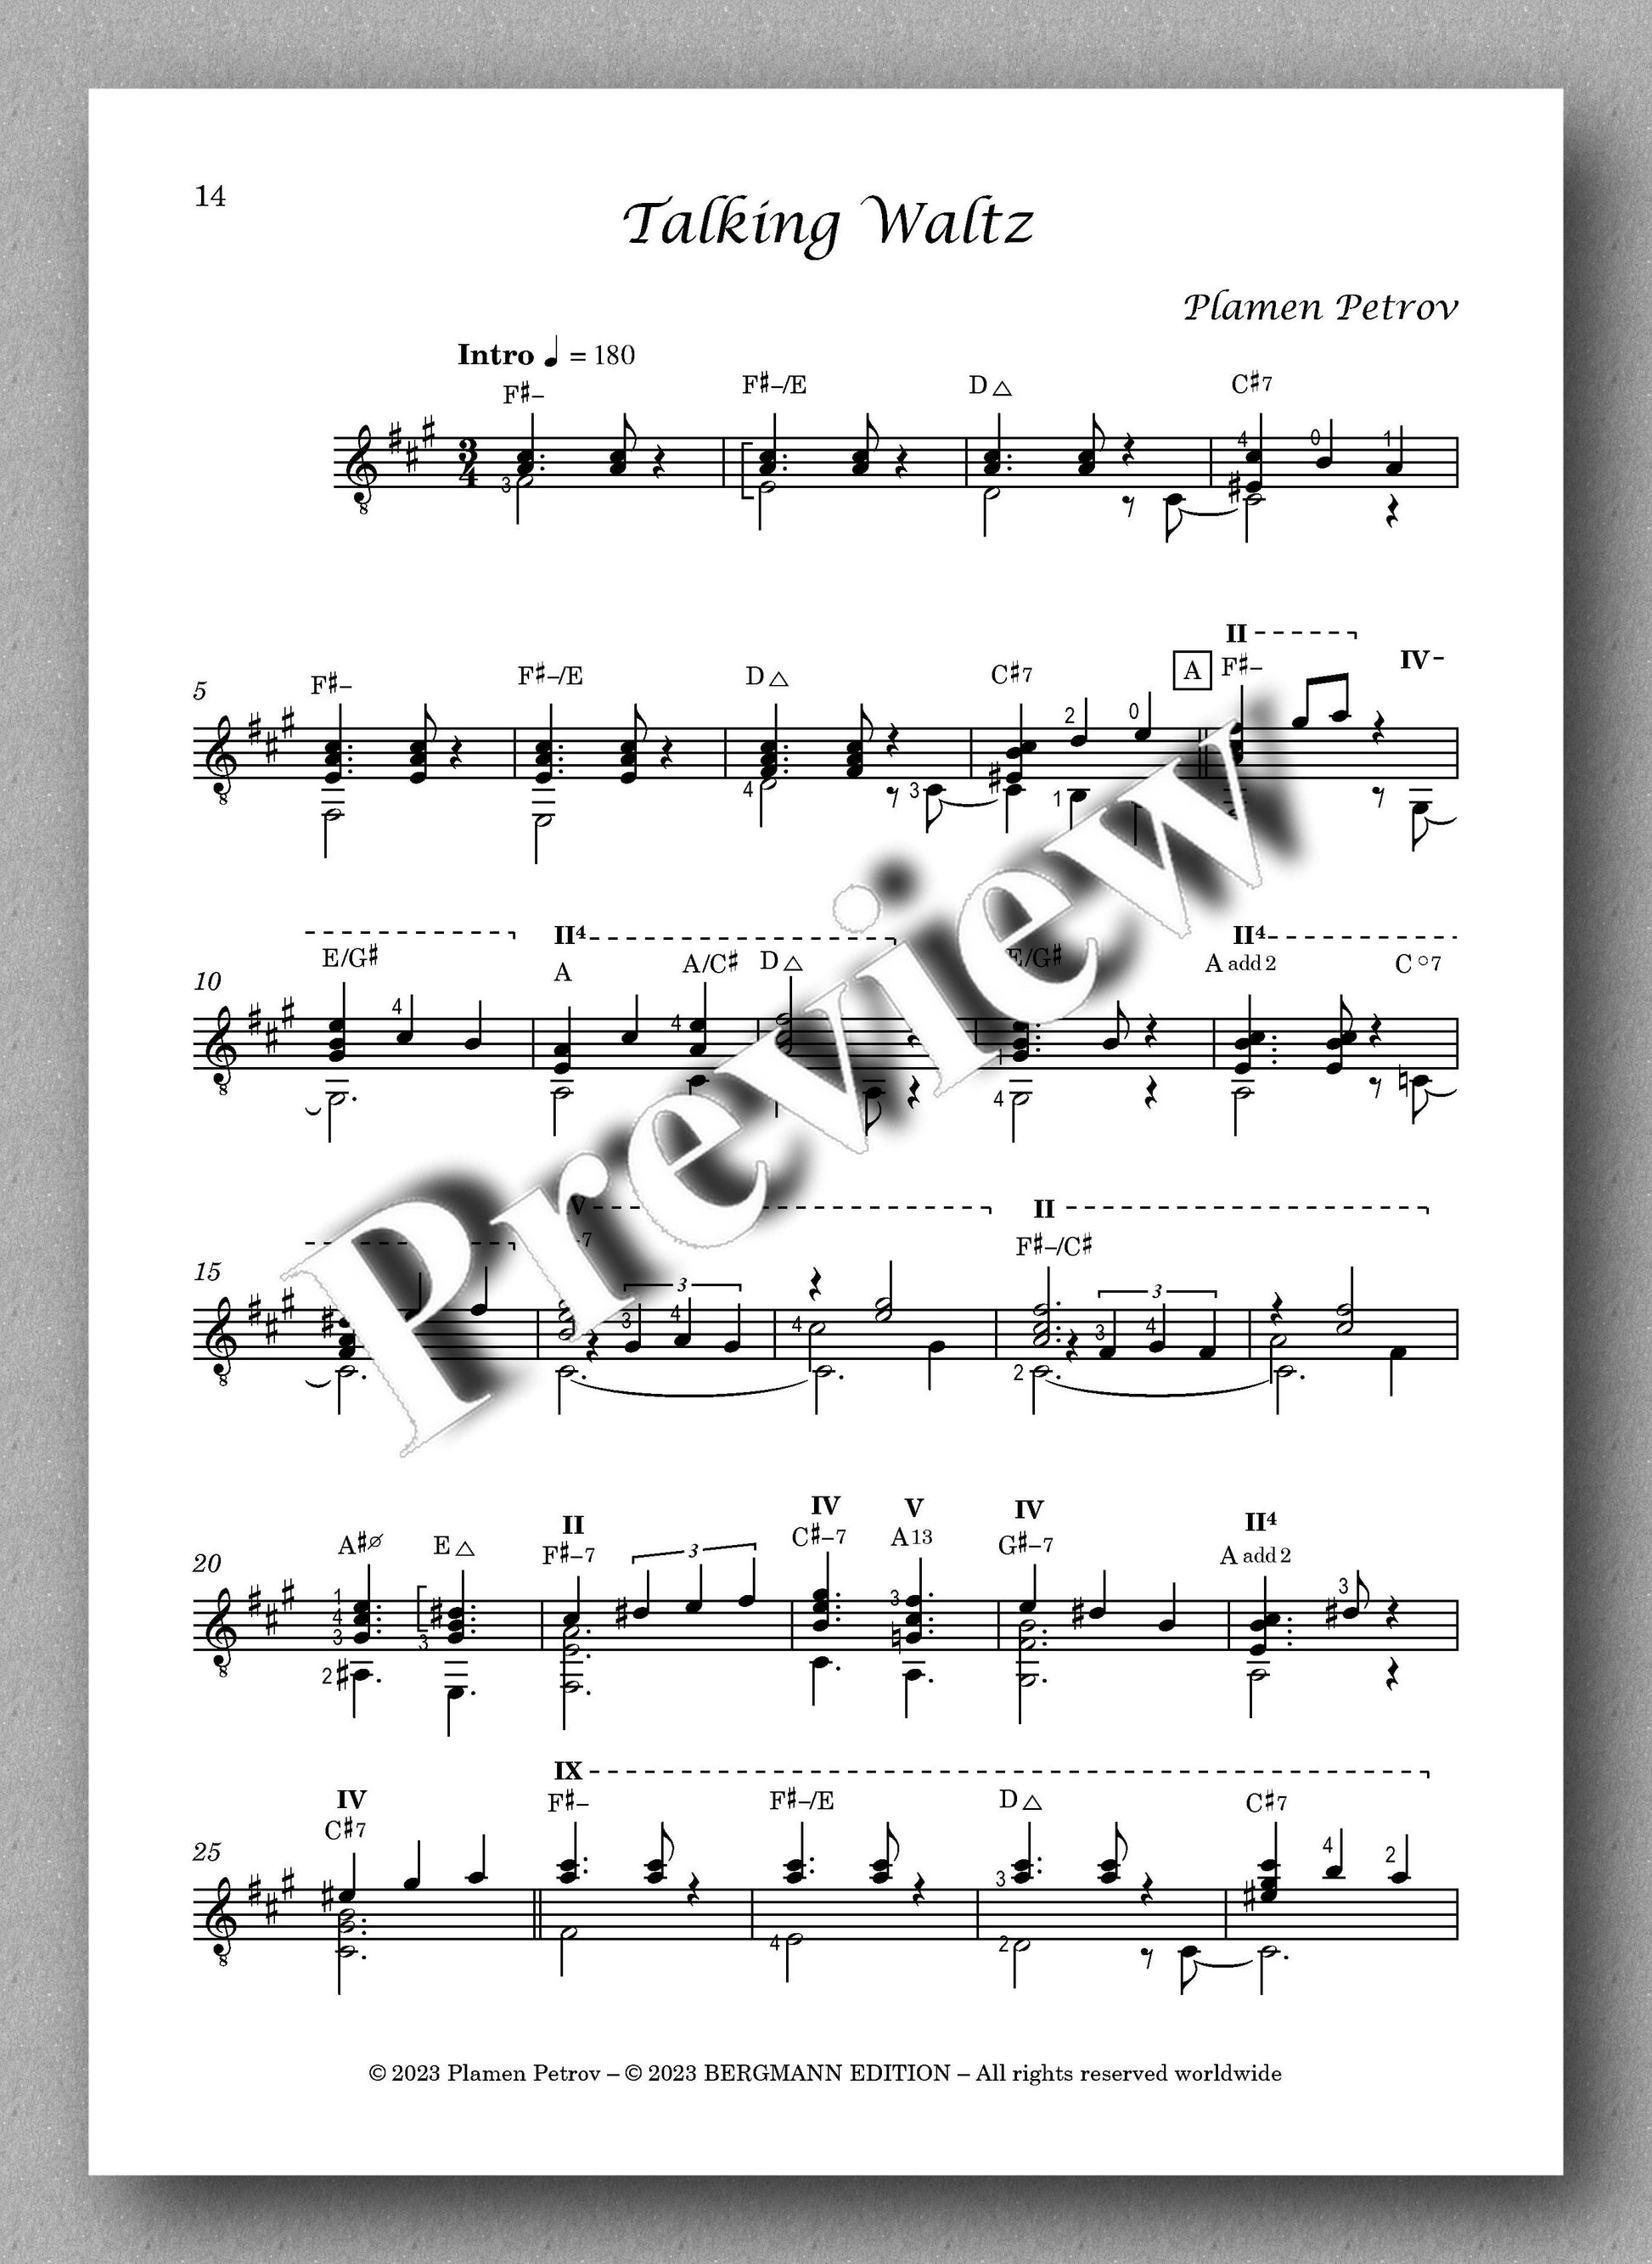 "When You’re Waiting for Me", by Plamen Petrov - preview of the Music score 3